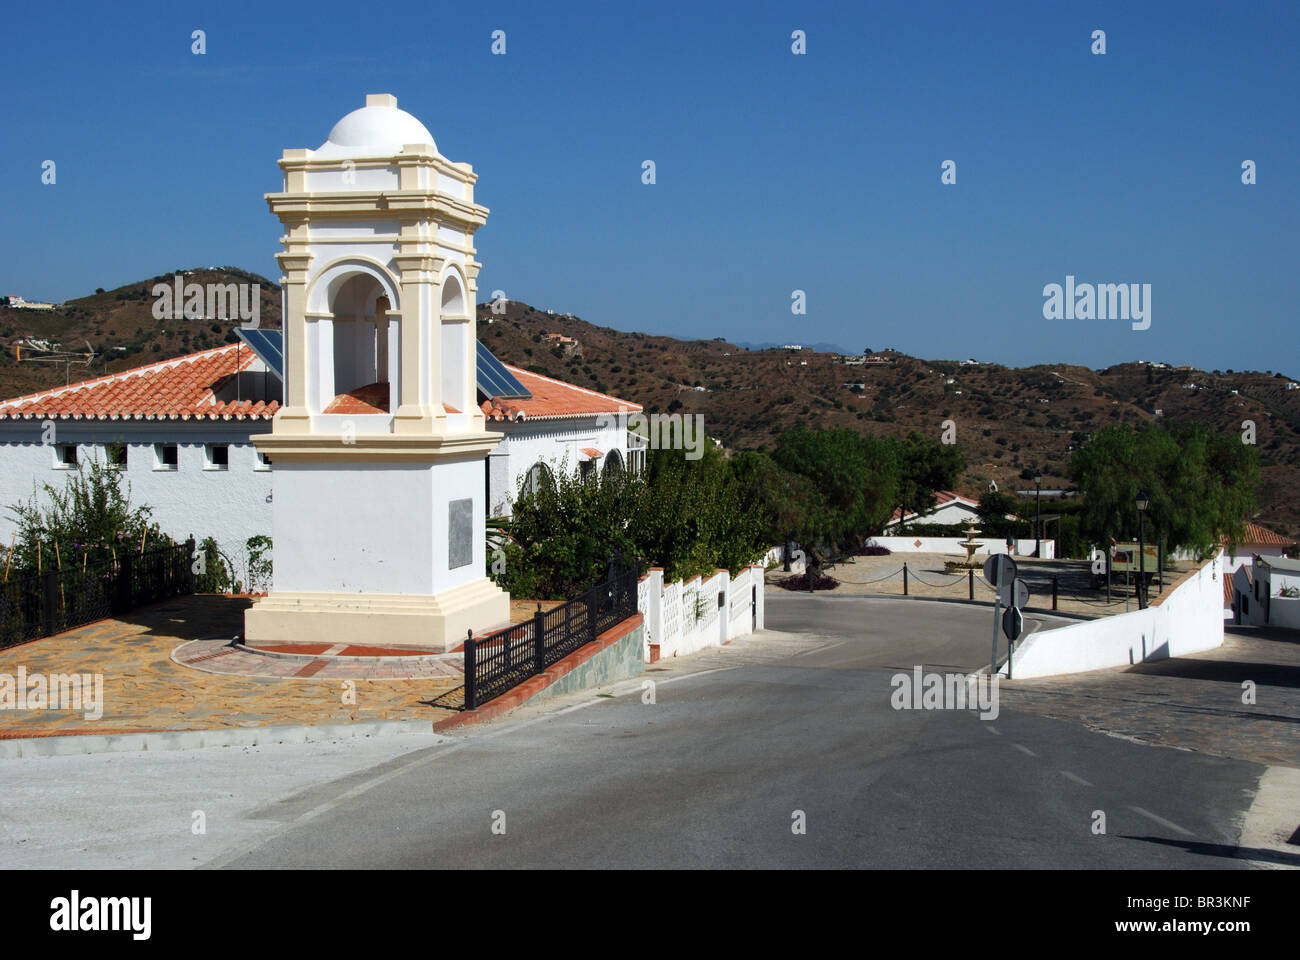 Monument at the entrance to the village, Macharaviaya, Costa del Sol, Malaga Province, Andalucia, Spain, Western Europe. Stock Photo